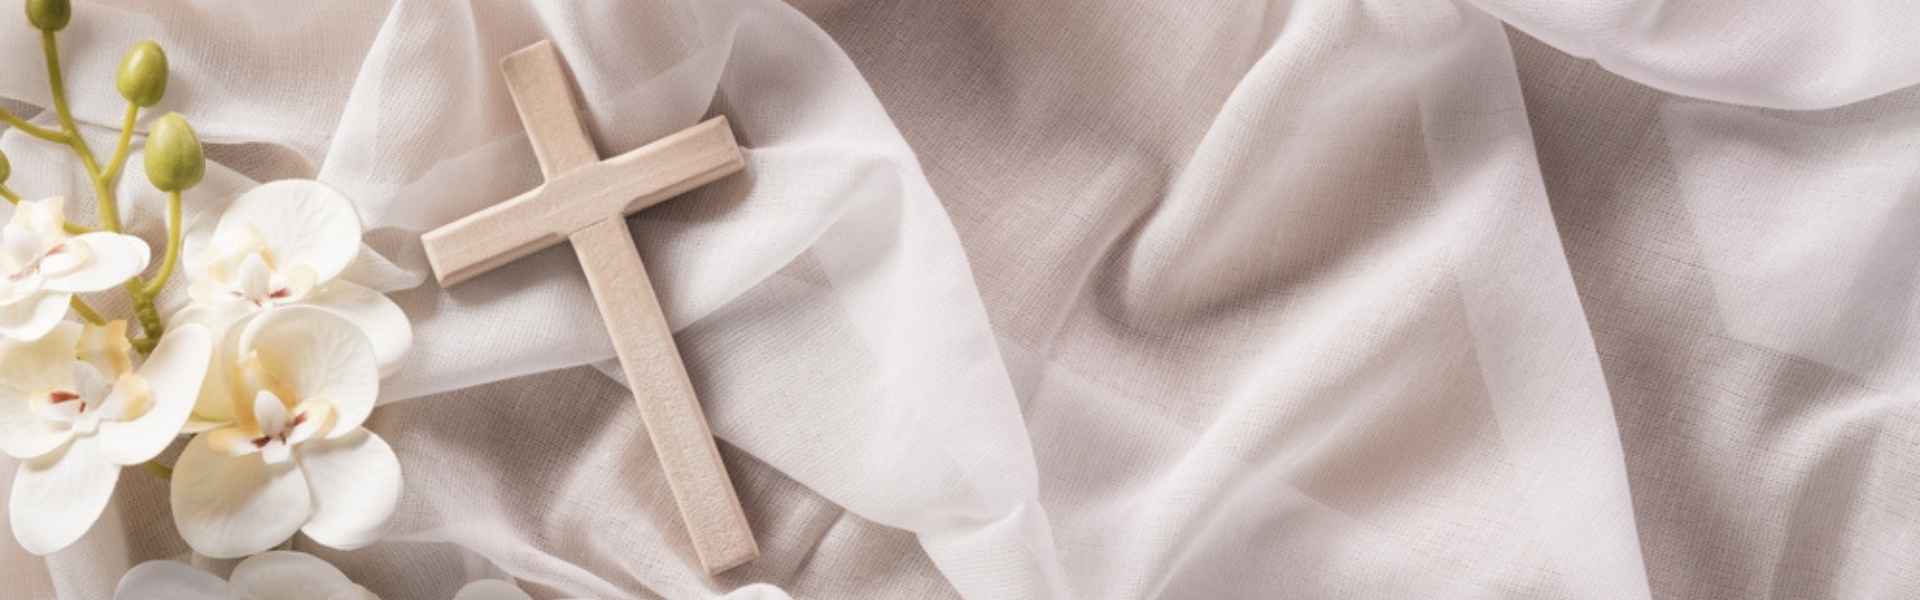 small wooden cross on white fabric